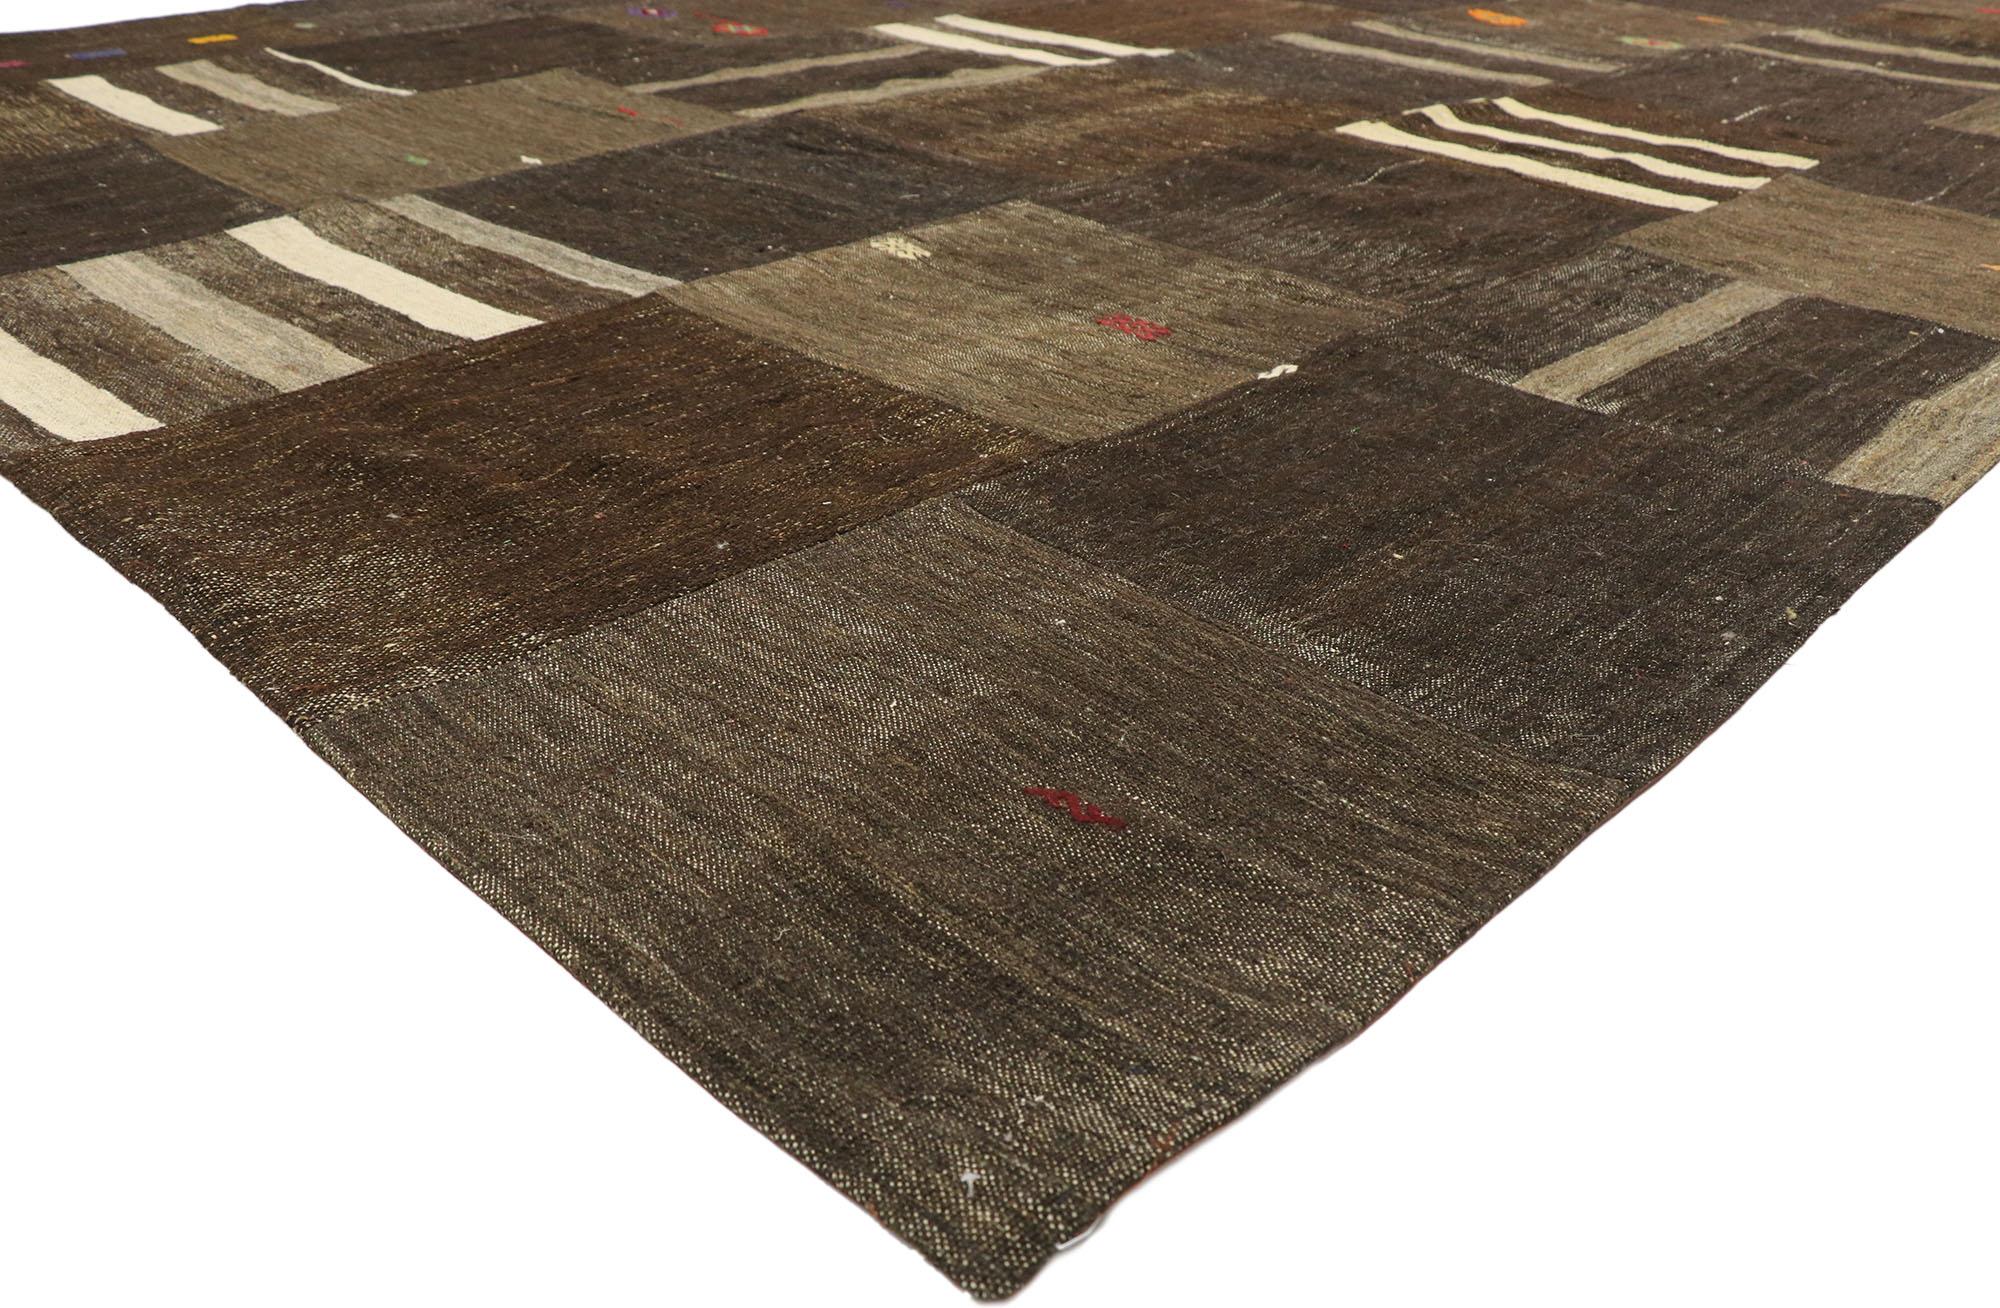 ​52132 Vintage Turkish Patchwork Rug with Masculine Preppy Style 09'09 x 14'00. Displaying a charming masculine appeal and the embodiment of ivy league style, this hand-woven vintage Turkish patchwork rug is a captivating vision of woven beauty​.